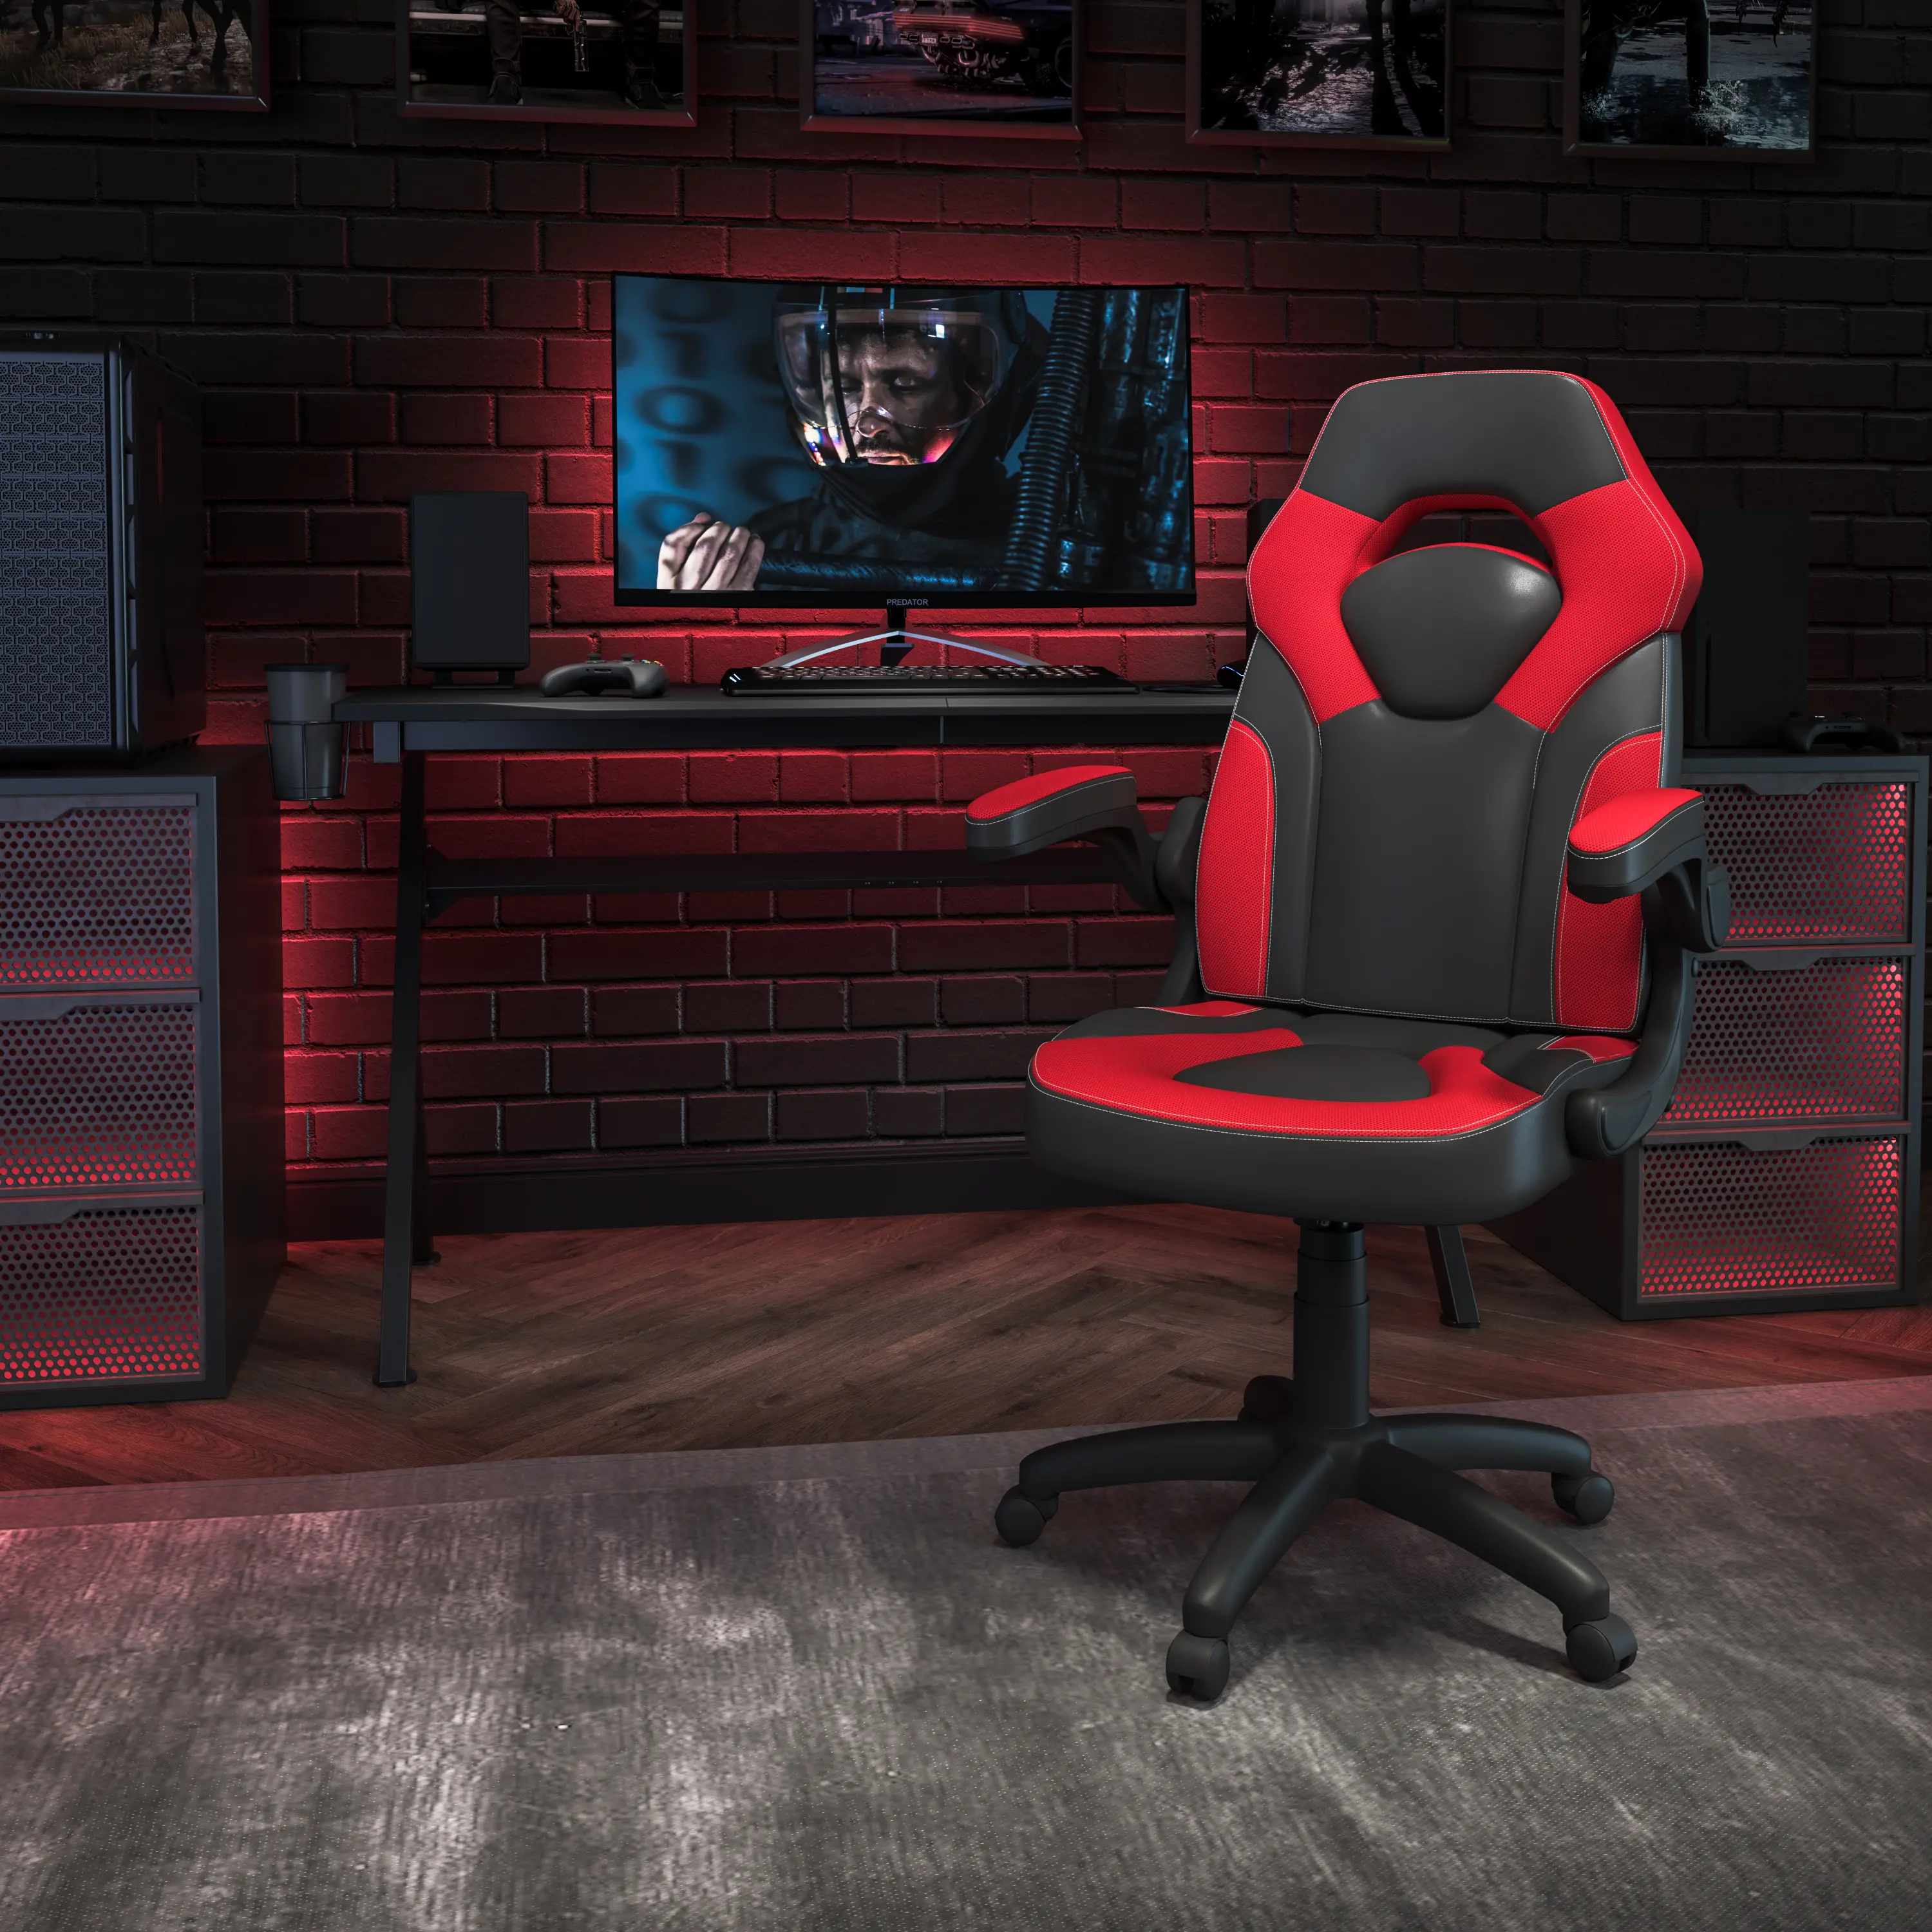 CH-00095-RED-GG X10 Red and Black Gaming Swivel Chair sku CH-00095-RED-GG